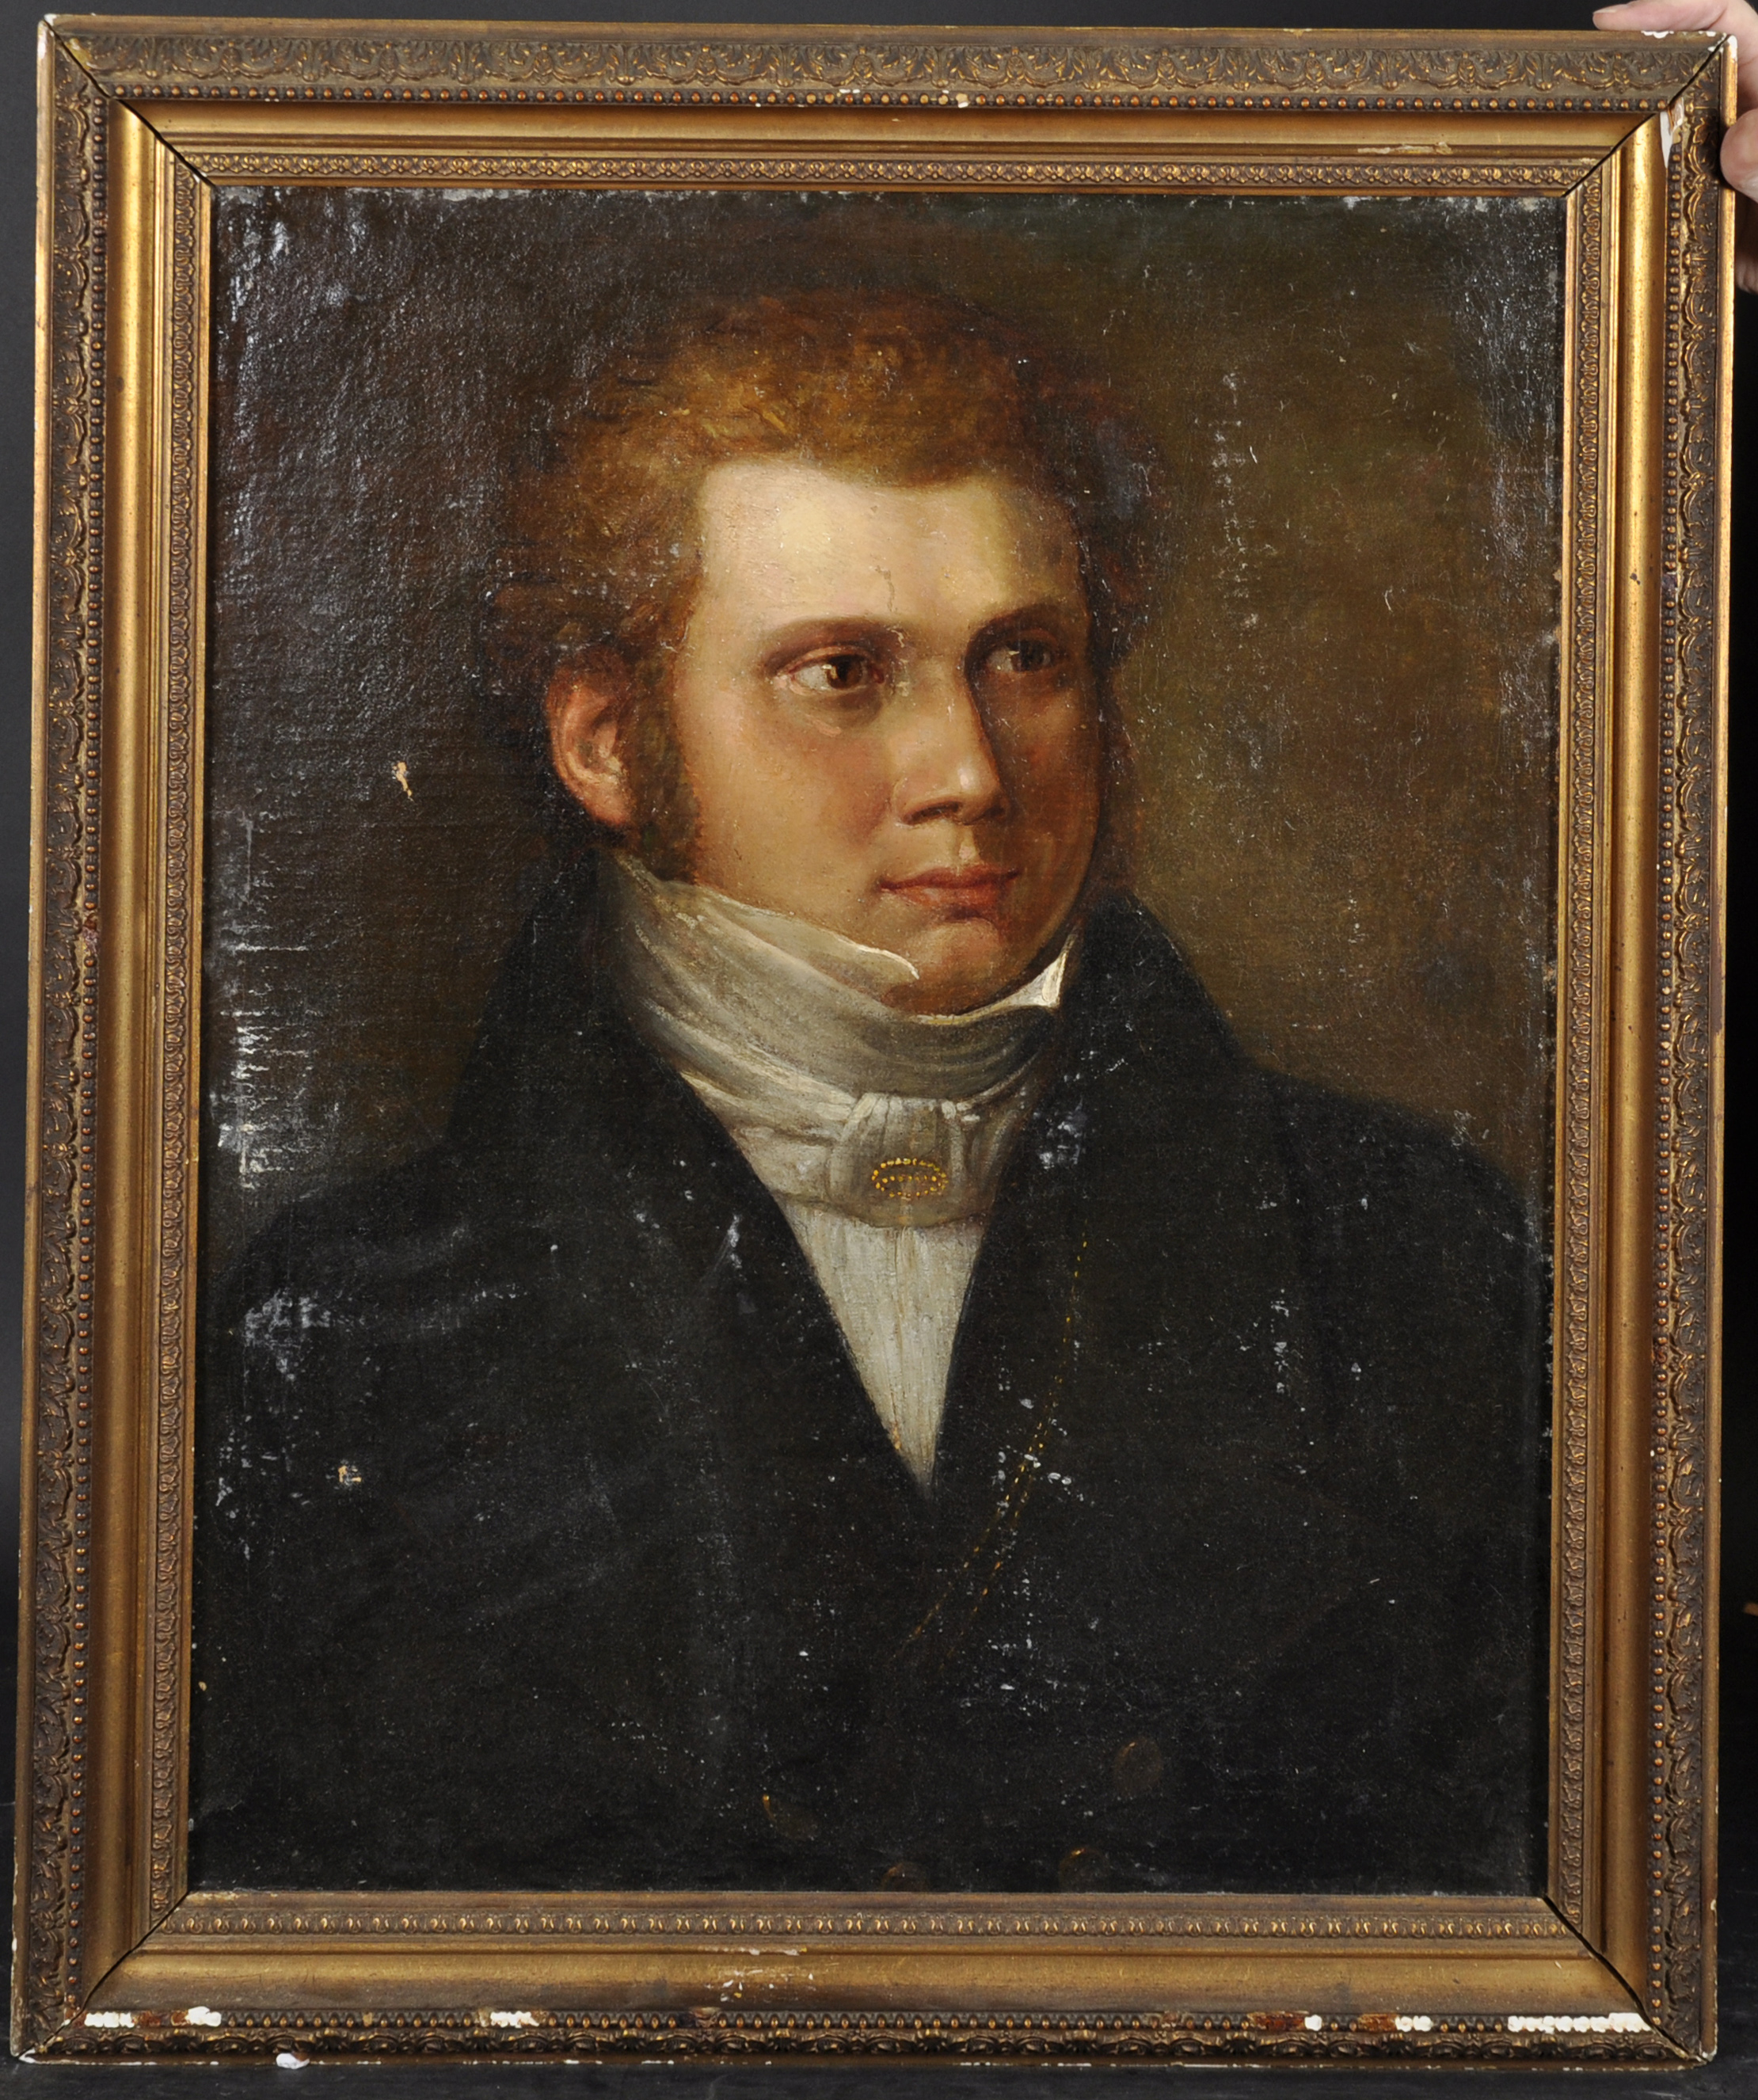 Late 18th Century English School. A Bust Portrait of a Man, Oil on Canvas, 24.75" x 19.25" (63 x - Image 2 of 3